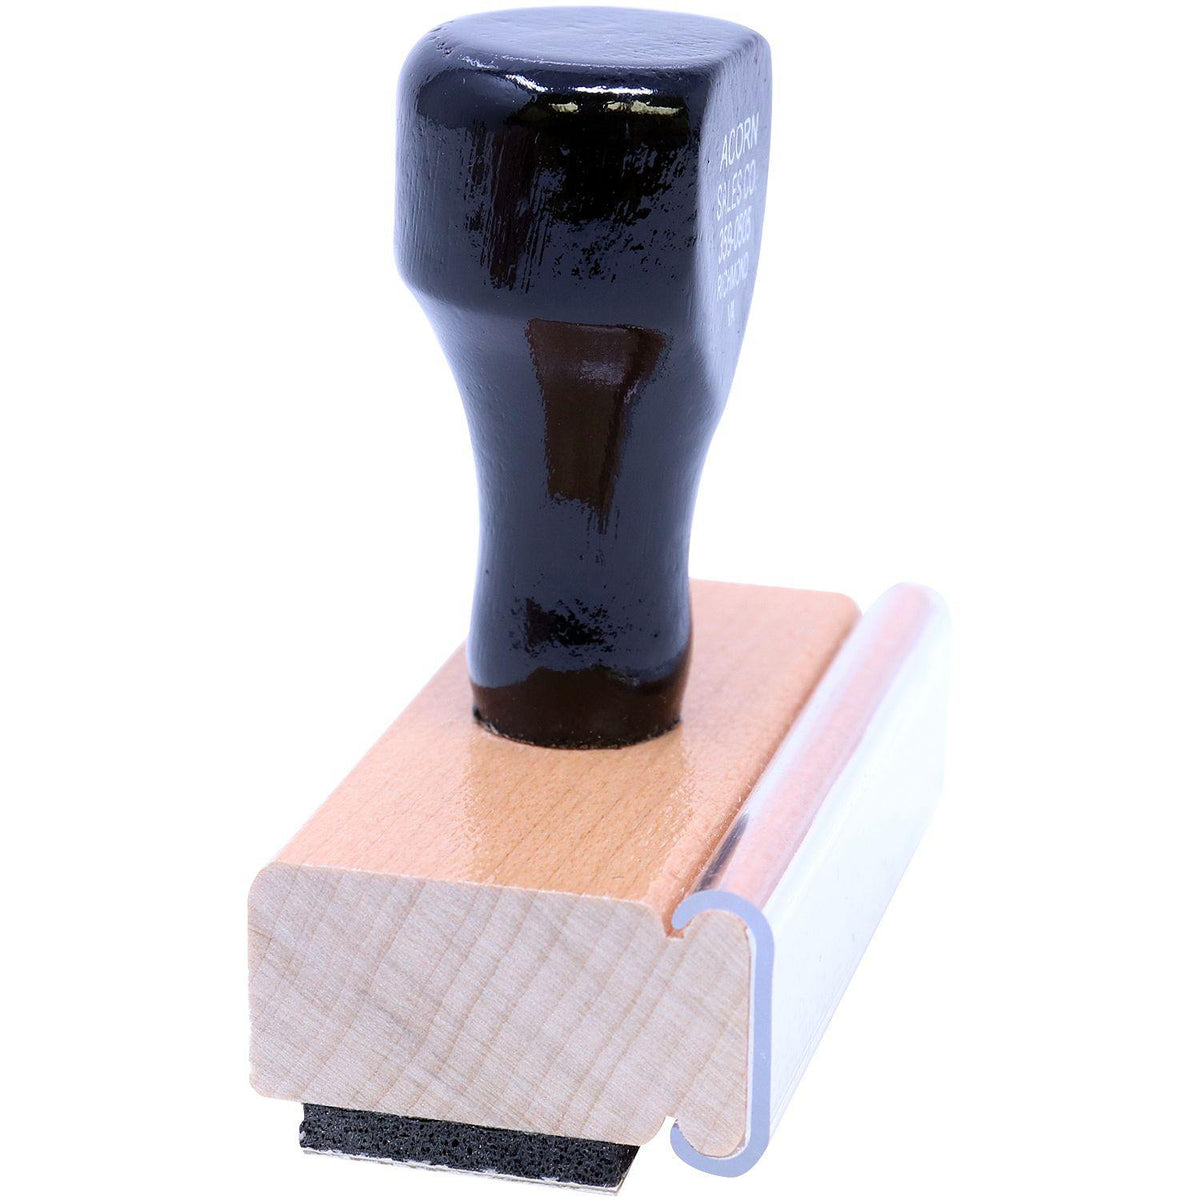 Medicare Rubber Stamp - Engineer Seal Stamps - Brand_Acorn, Impression Size_Small, Stamp Type_Regular Stamp, Type of Use_Medical Office